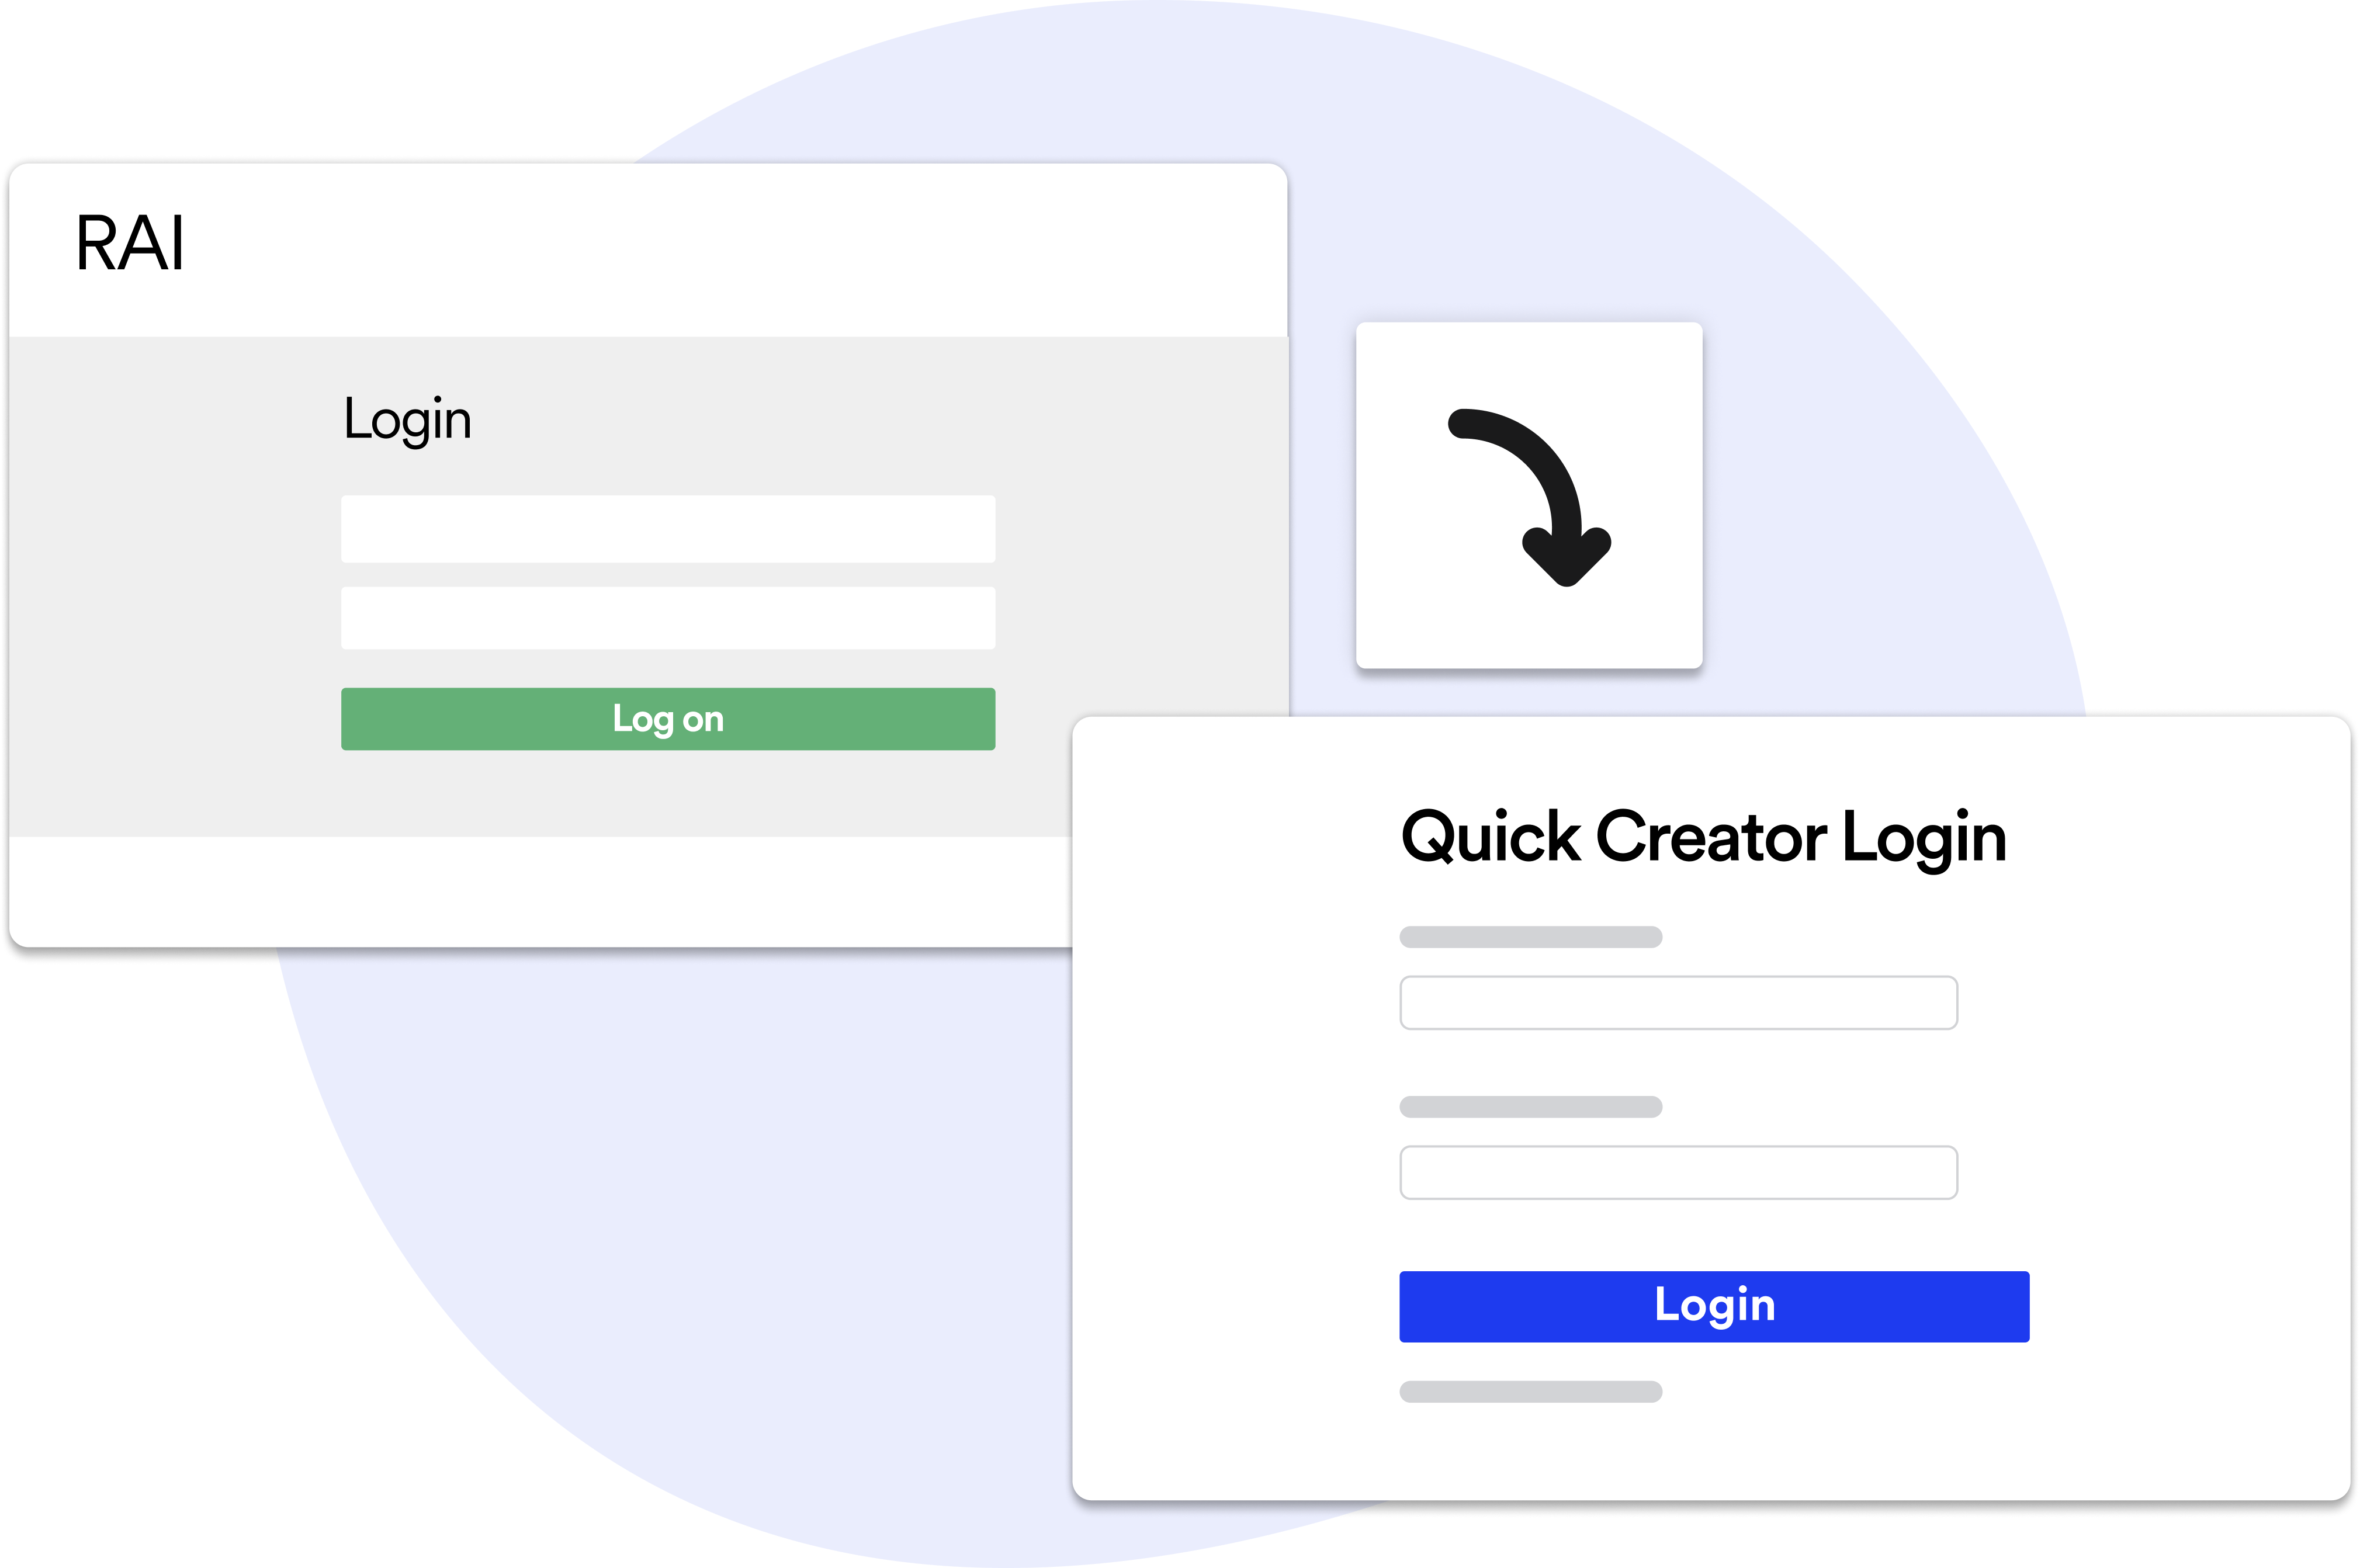 Image showing an illustrated login page to Mono's Reseller Admin Interface with an arrow to an illustrated depiction of Mono's Quick creator login.